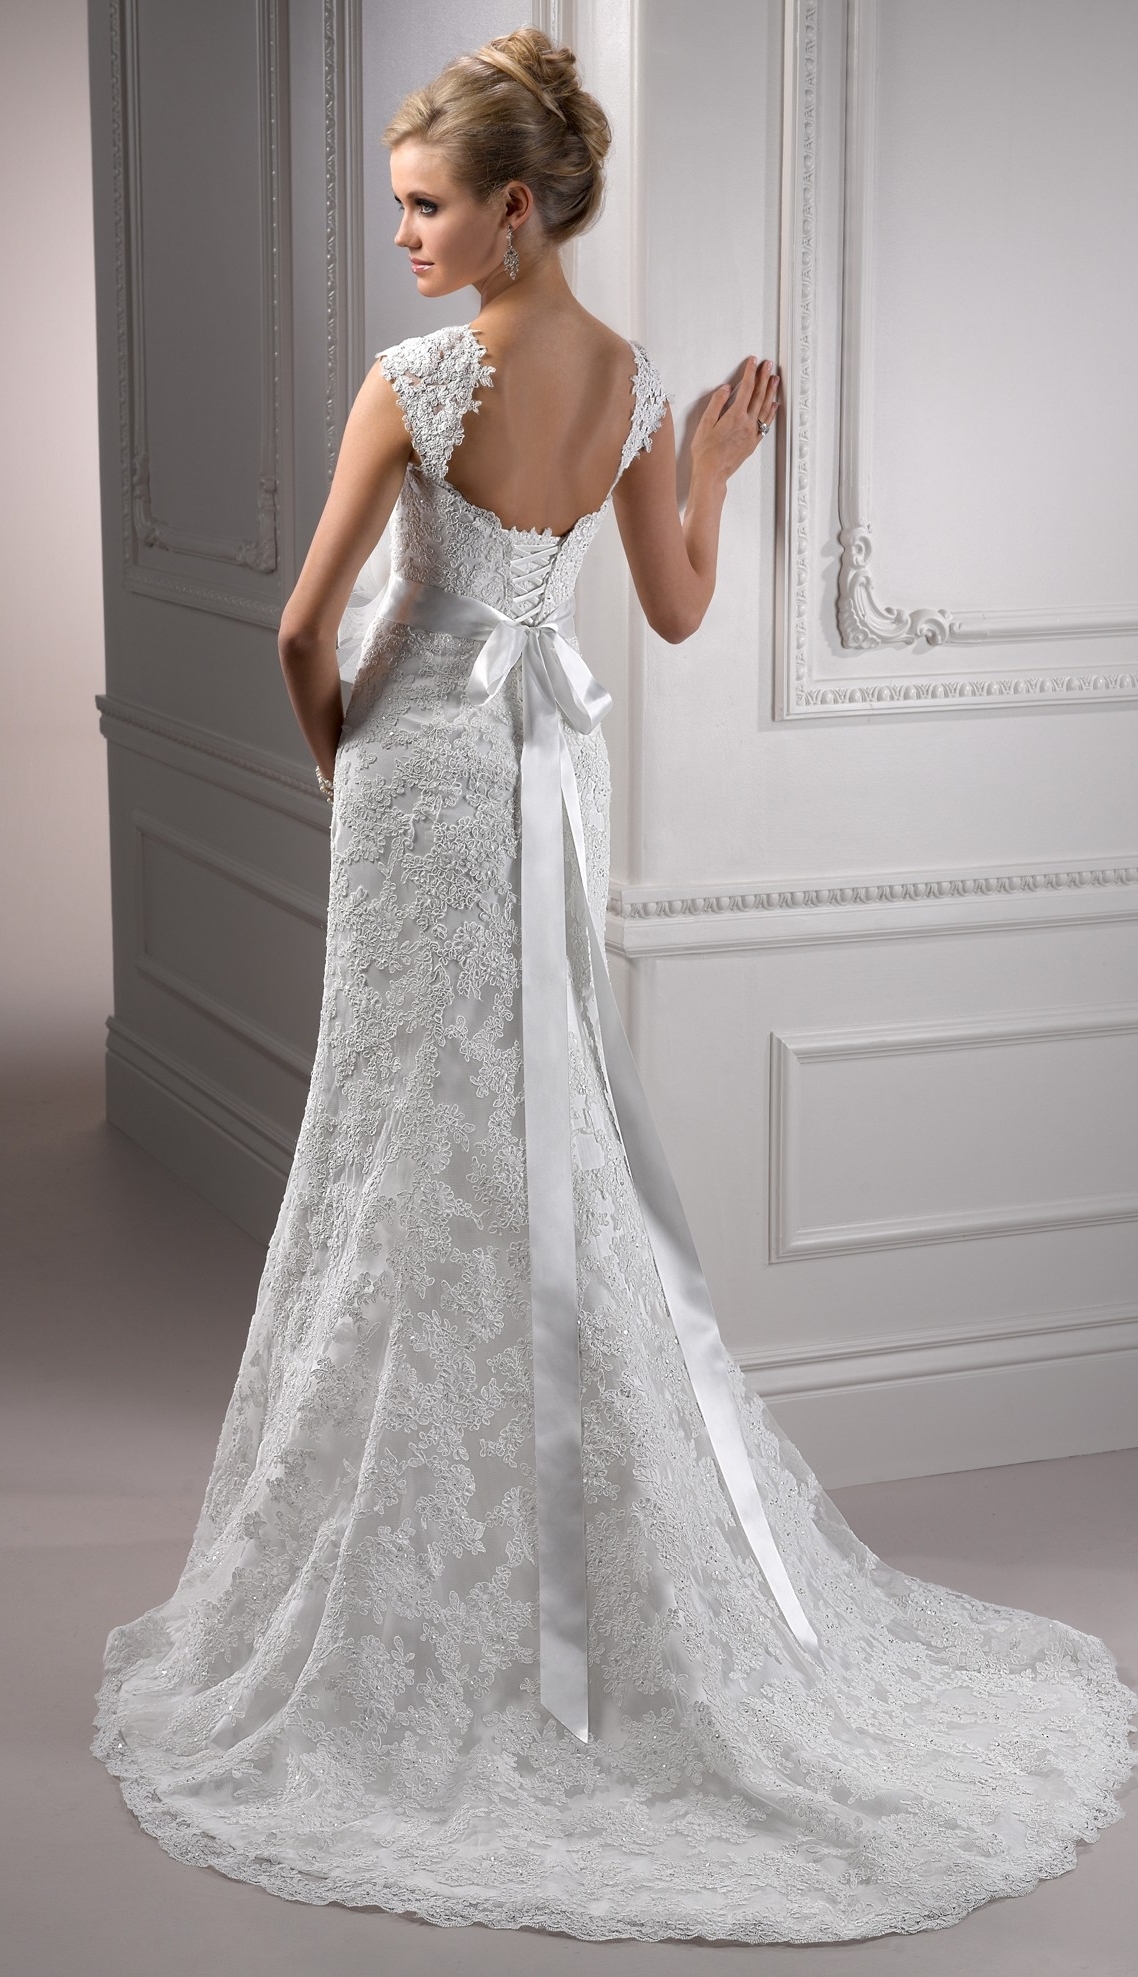 Contemporary Wedding Dress With Straps